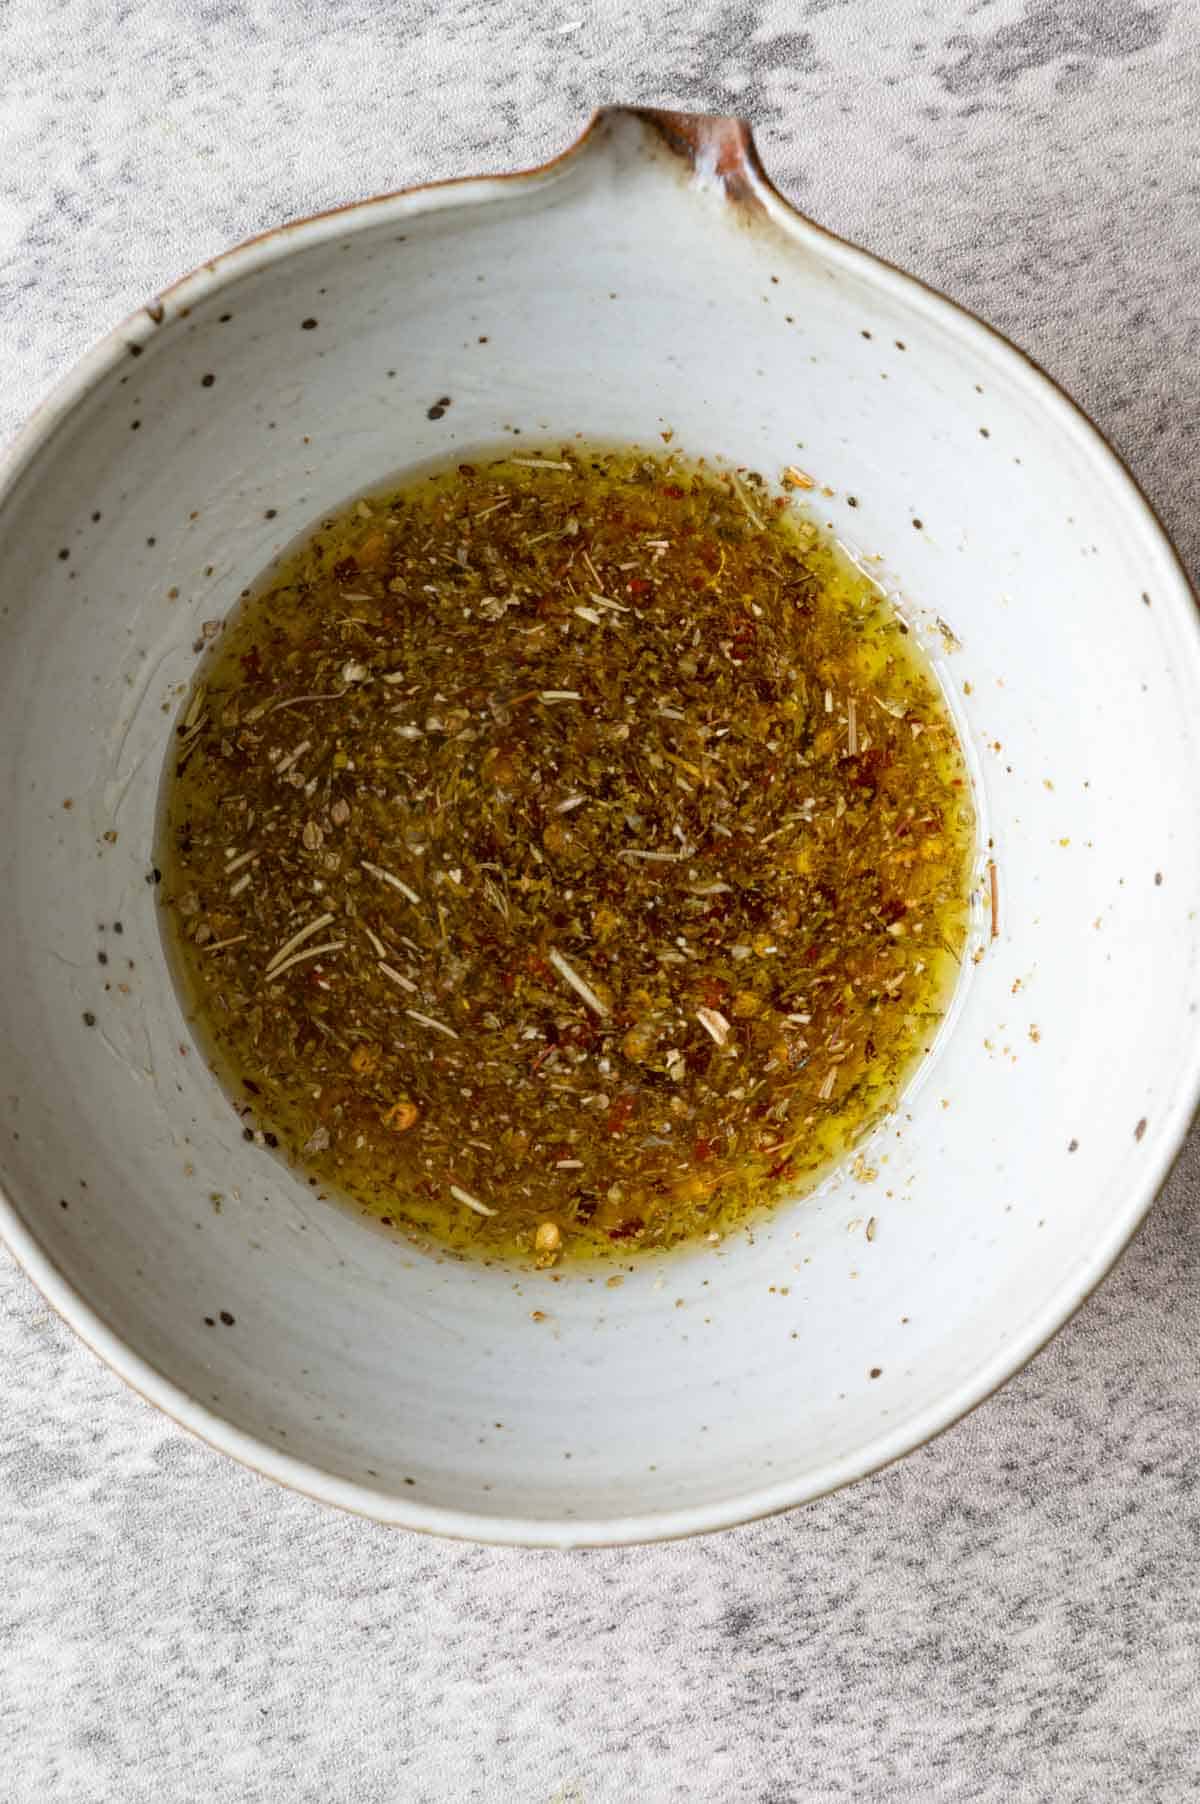 Dressing in a grey bowl made from olive oil, dried herbs, and vinegar.